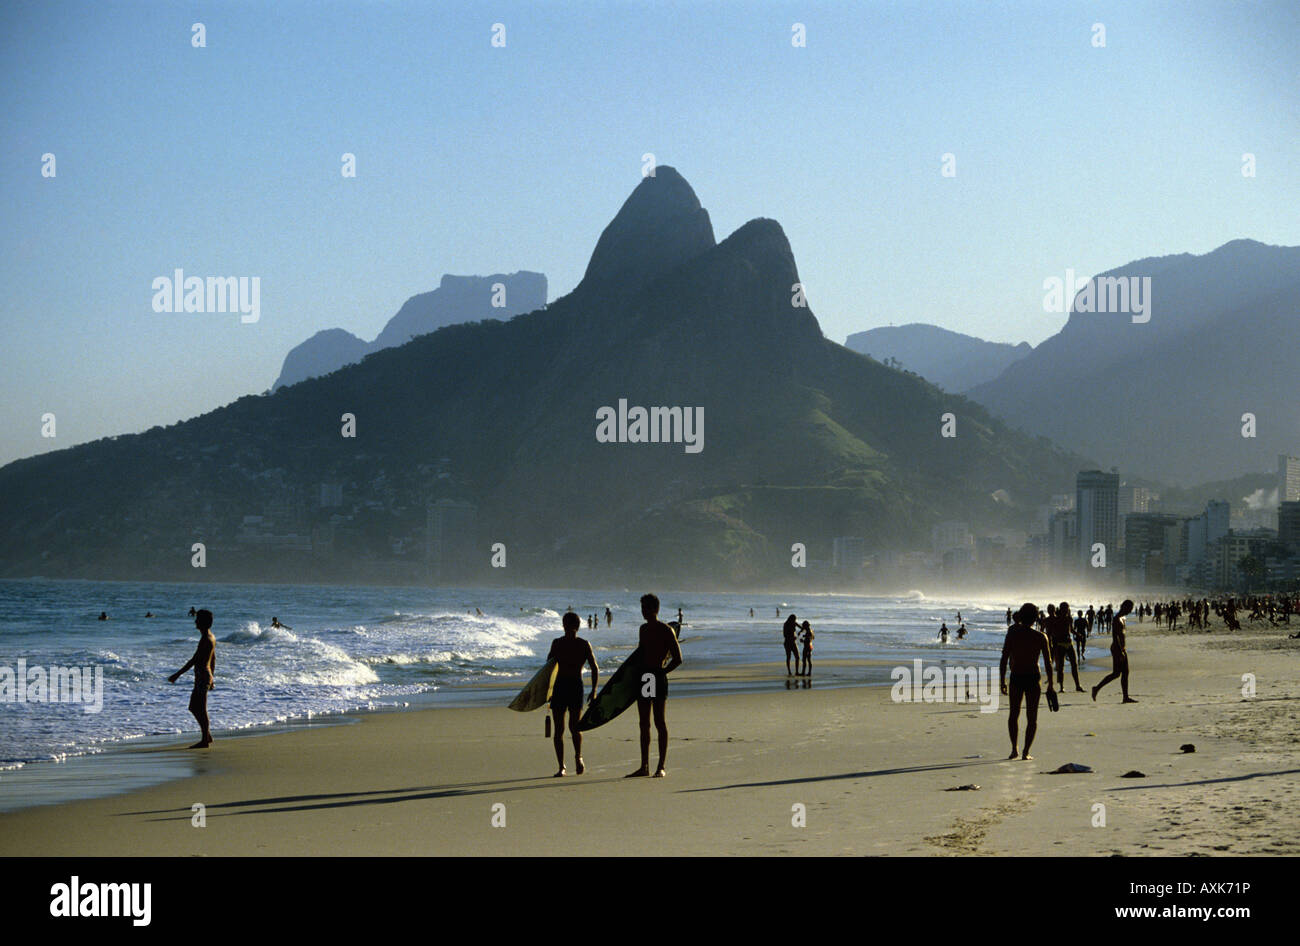 Couple walk with surfboards on Ipanema Beach with sea and unusual shaped hills beyond in Rio De Janeiro Brazil Stock Photo